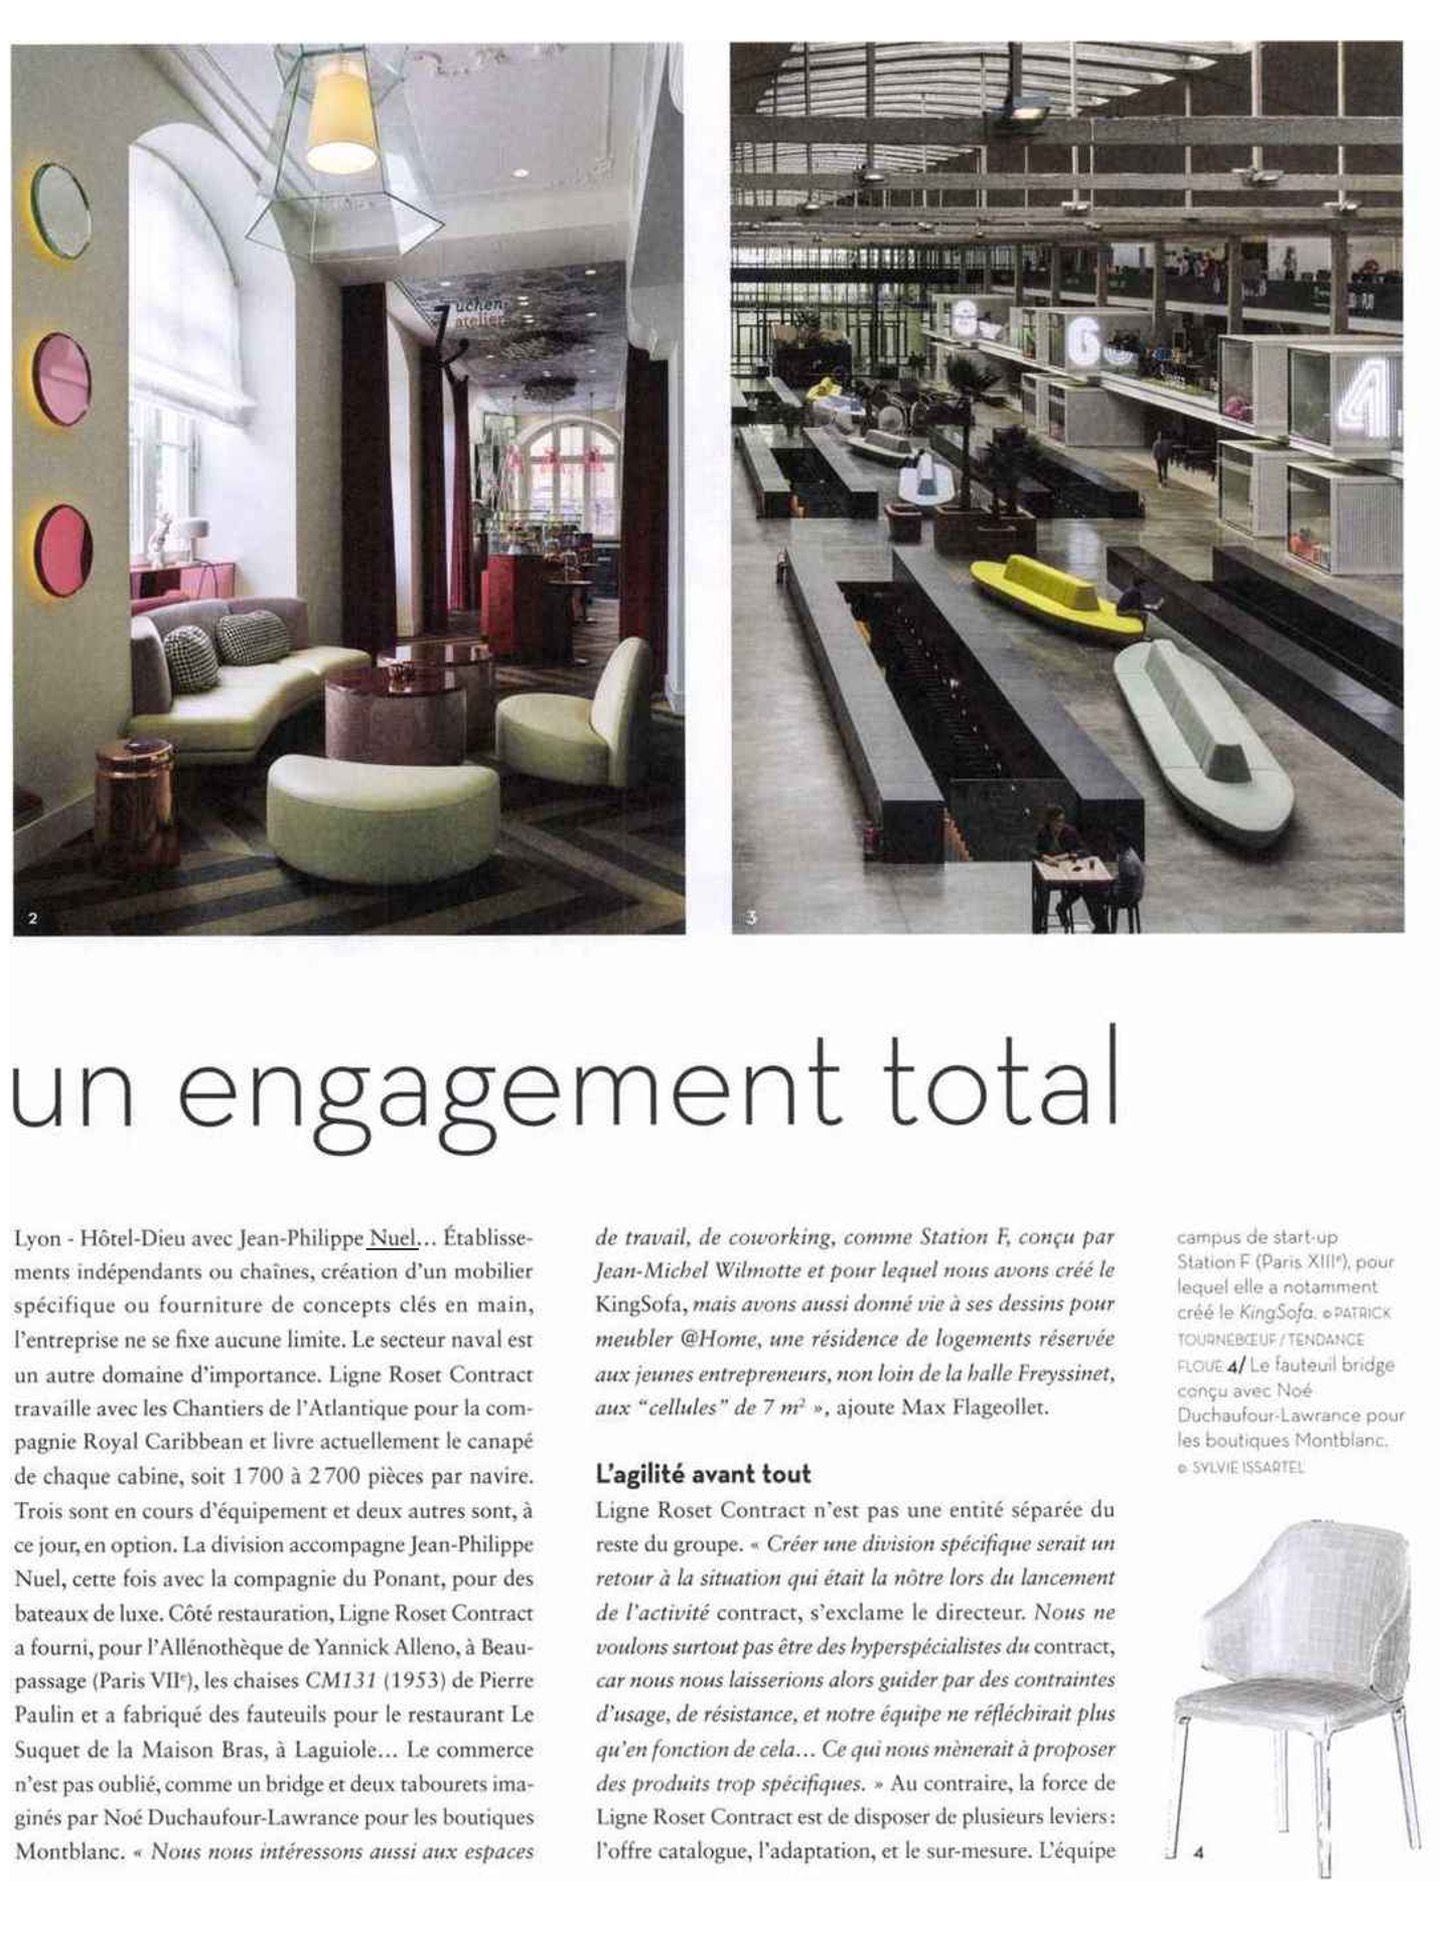 article on the studio jean philippe nuel and ligne roset in the magazine ideat